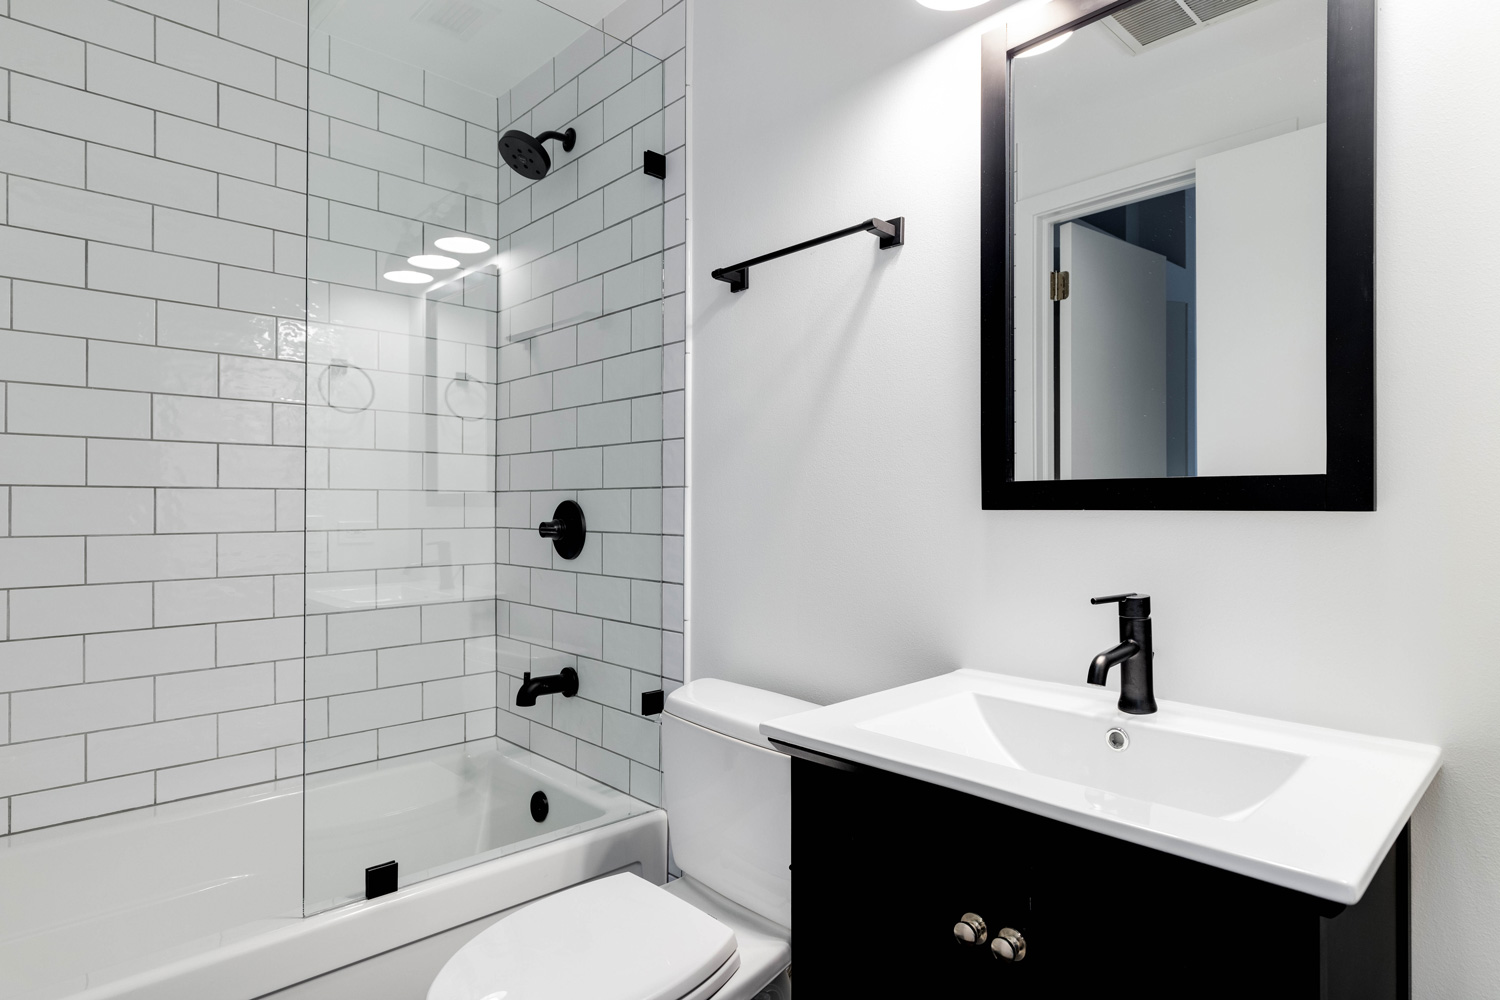 A small modern bathroom with a dark vanity, mirror frame, and hardware.